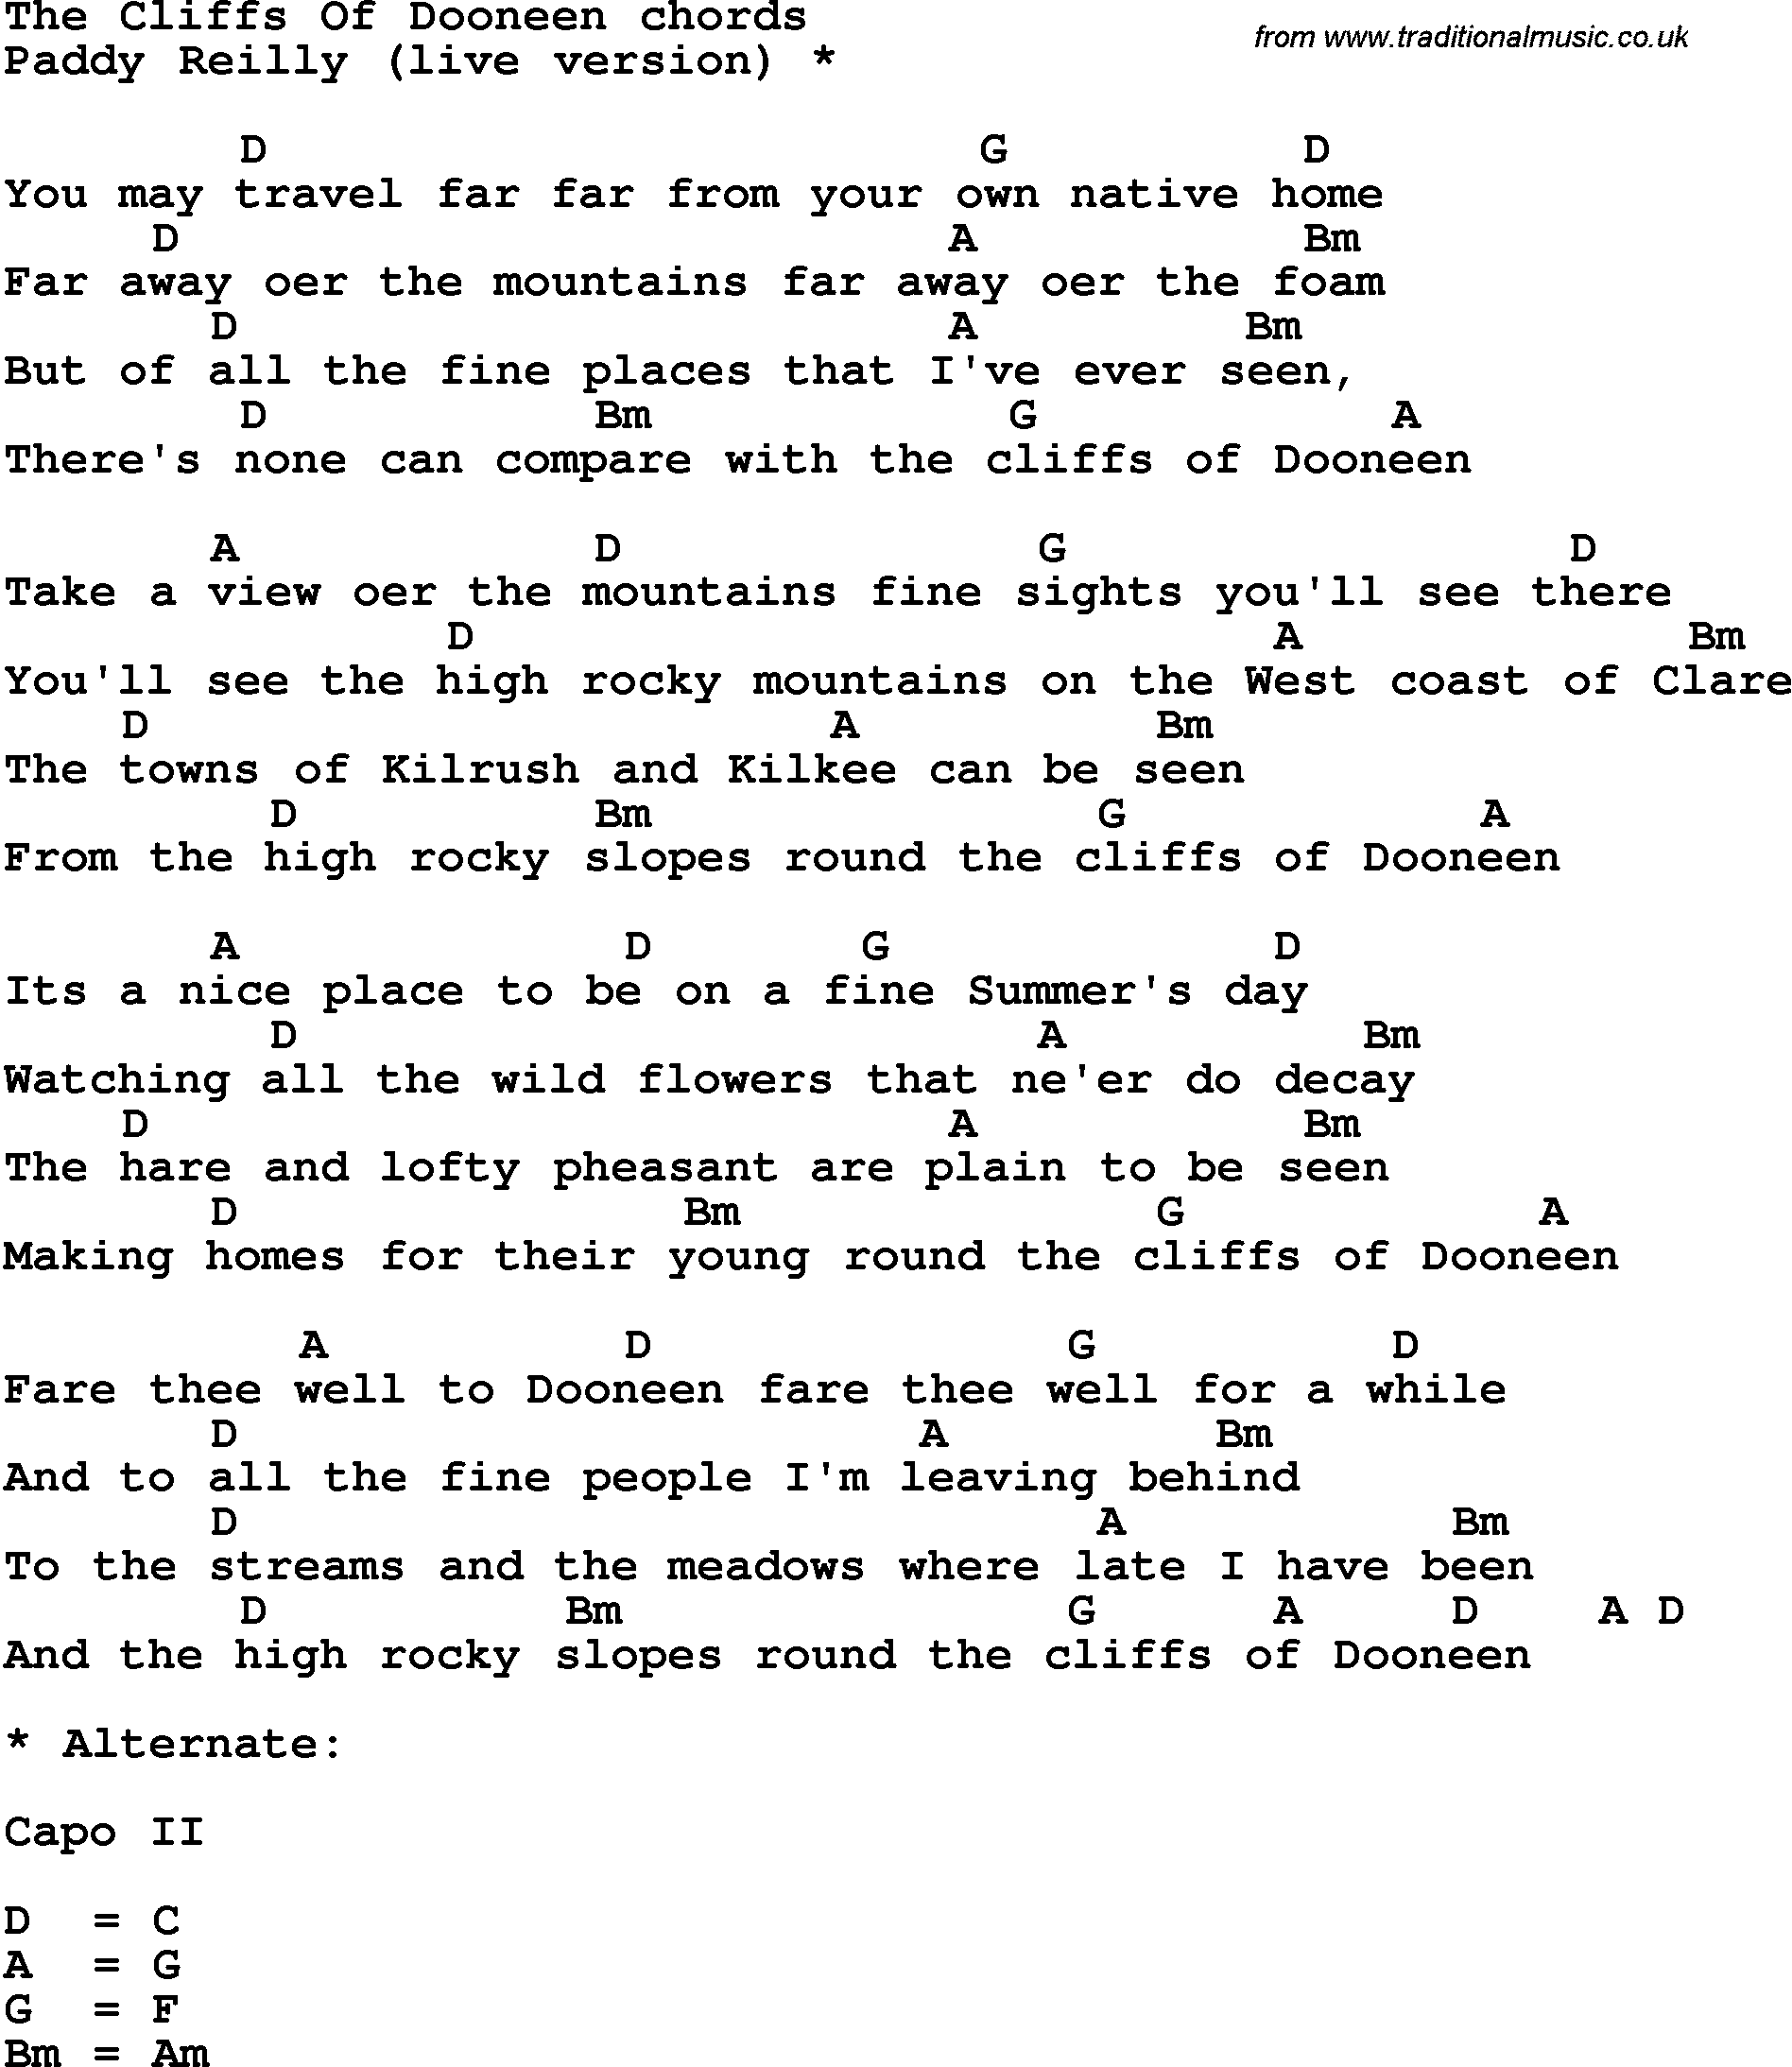 Song Lyrics with guitar chords for The Cliffs Of Dooneen